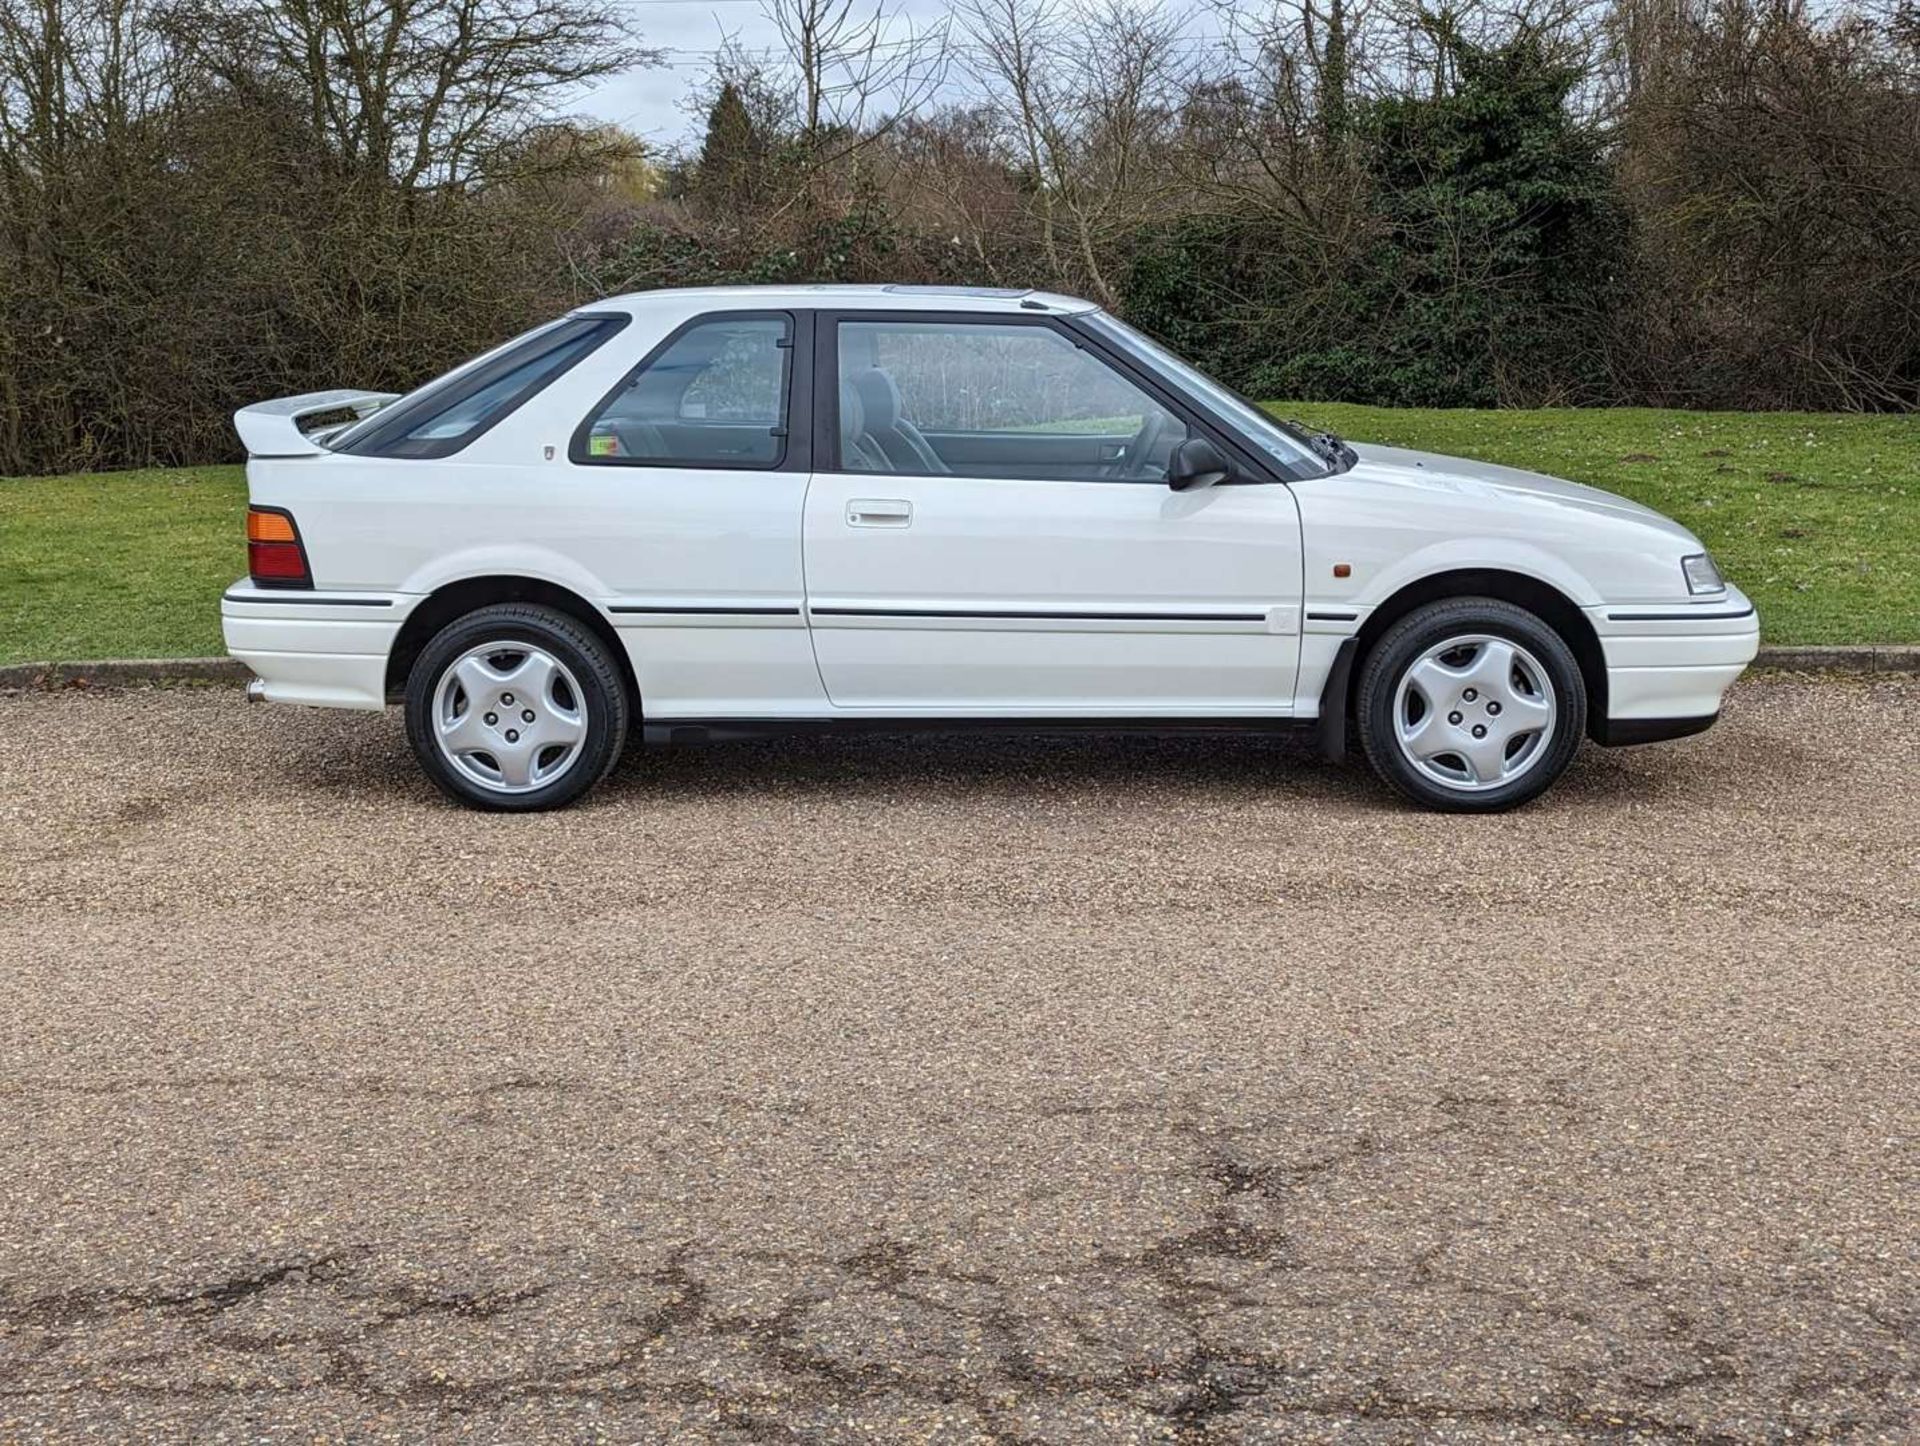 1991 ROVER 216 GTI TWIN CAM - Image 8 of 27